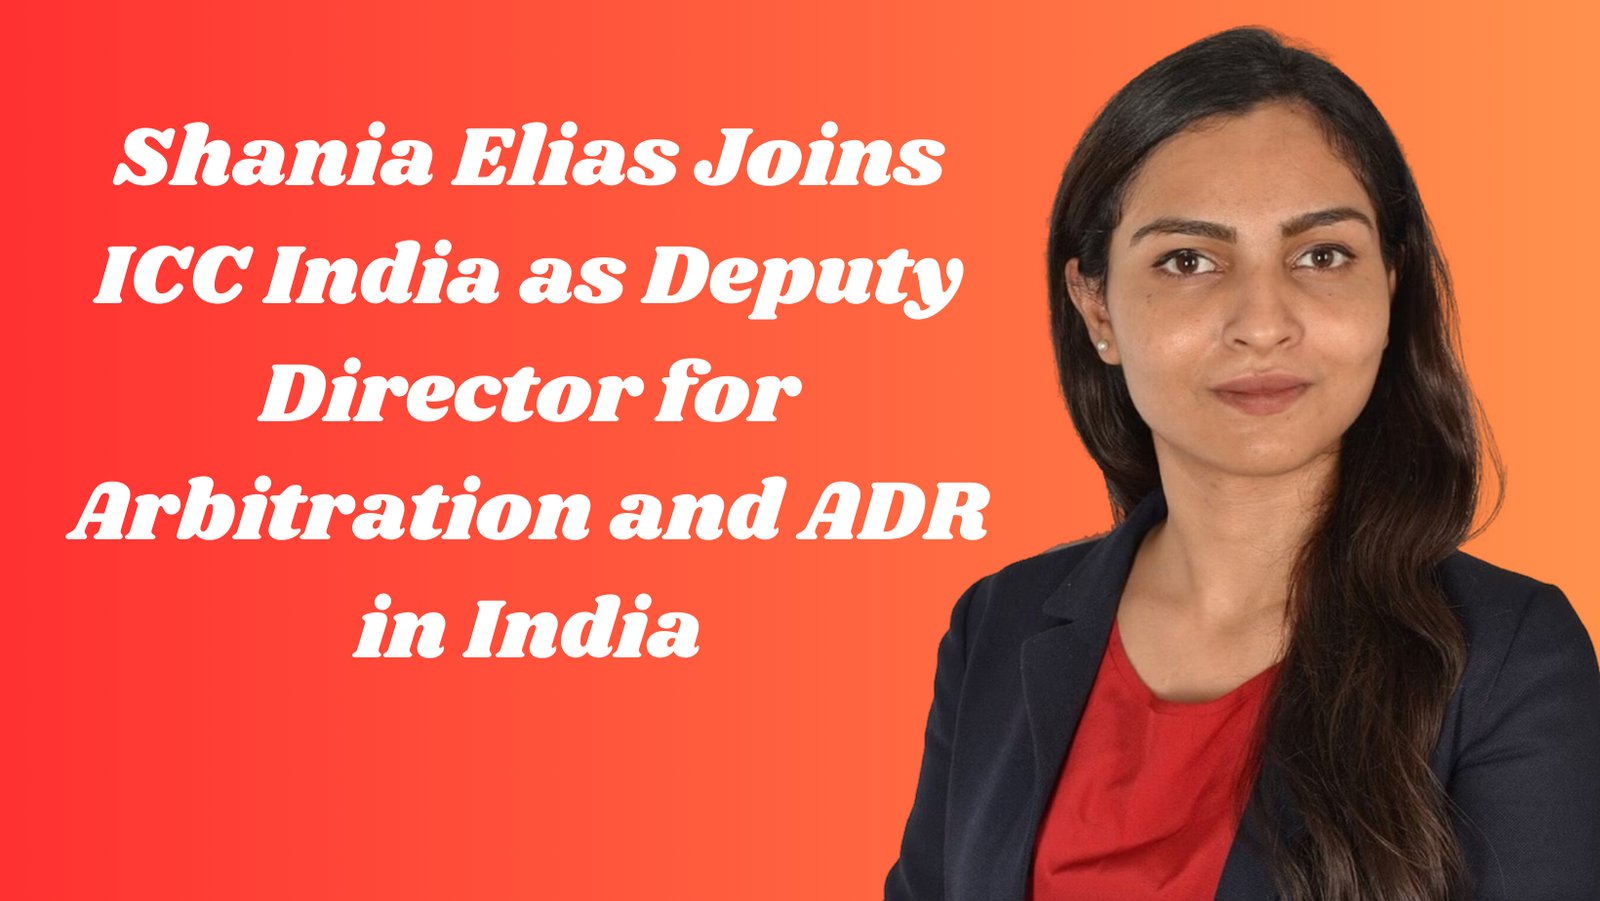 Shania Elias Joins ICC India as Deputy Director for Arbitration and ADR in India